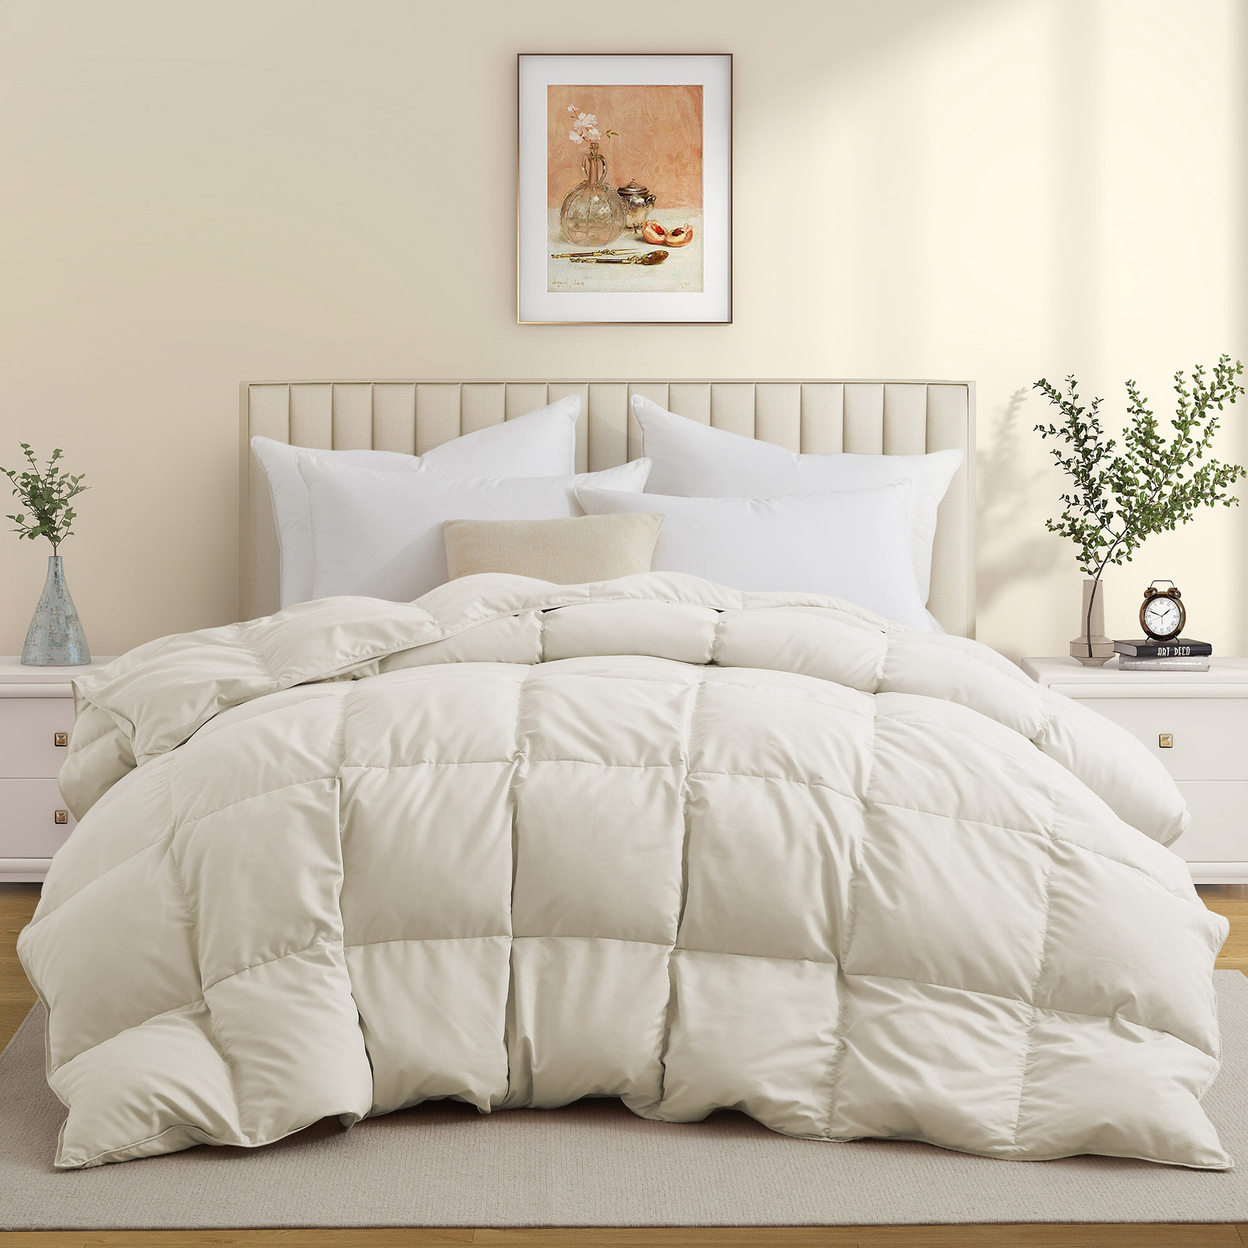 Premium All Seasons White Goose Feather Fiber And Down Comforter - Butter Cream, King